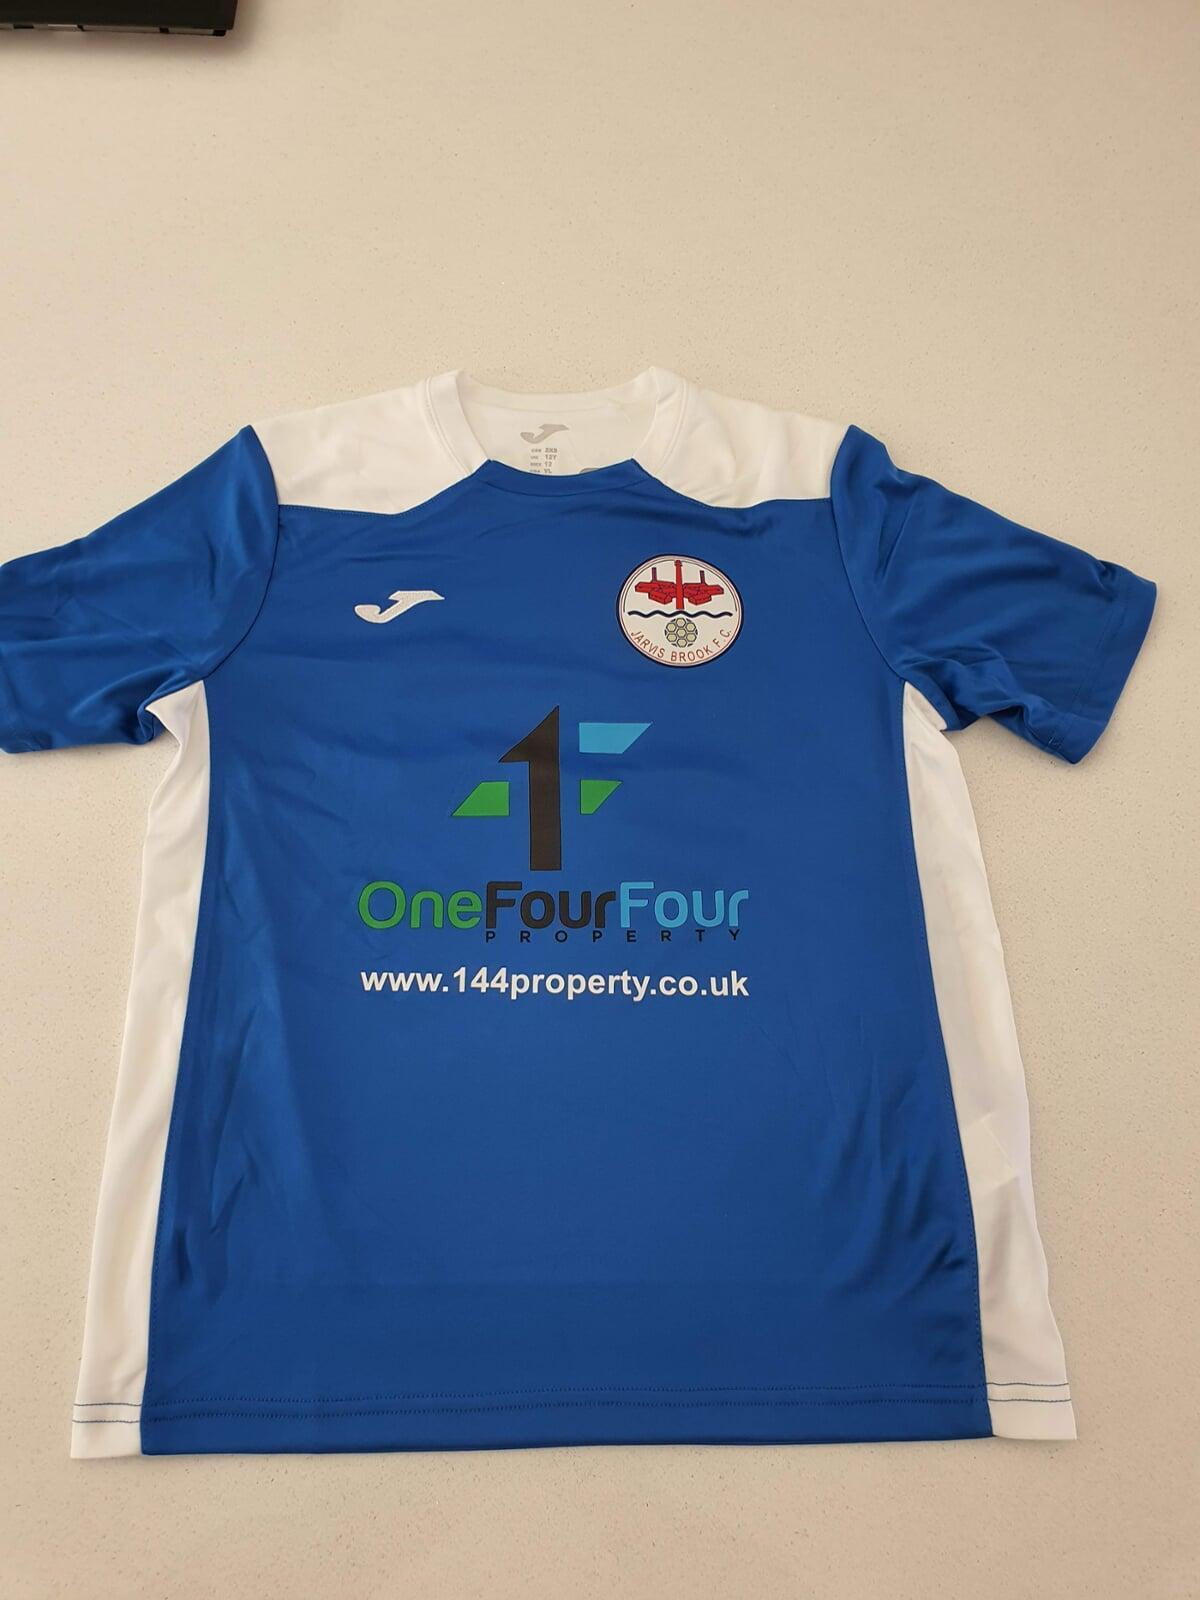 OneFourFour Sponsors Jarvis Brook Football Club